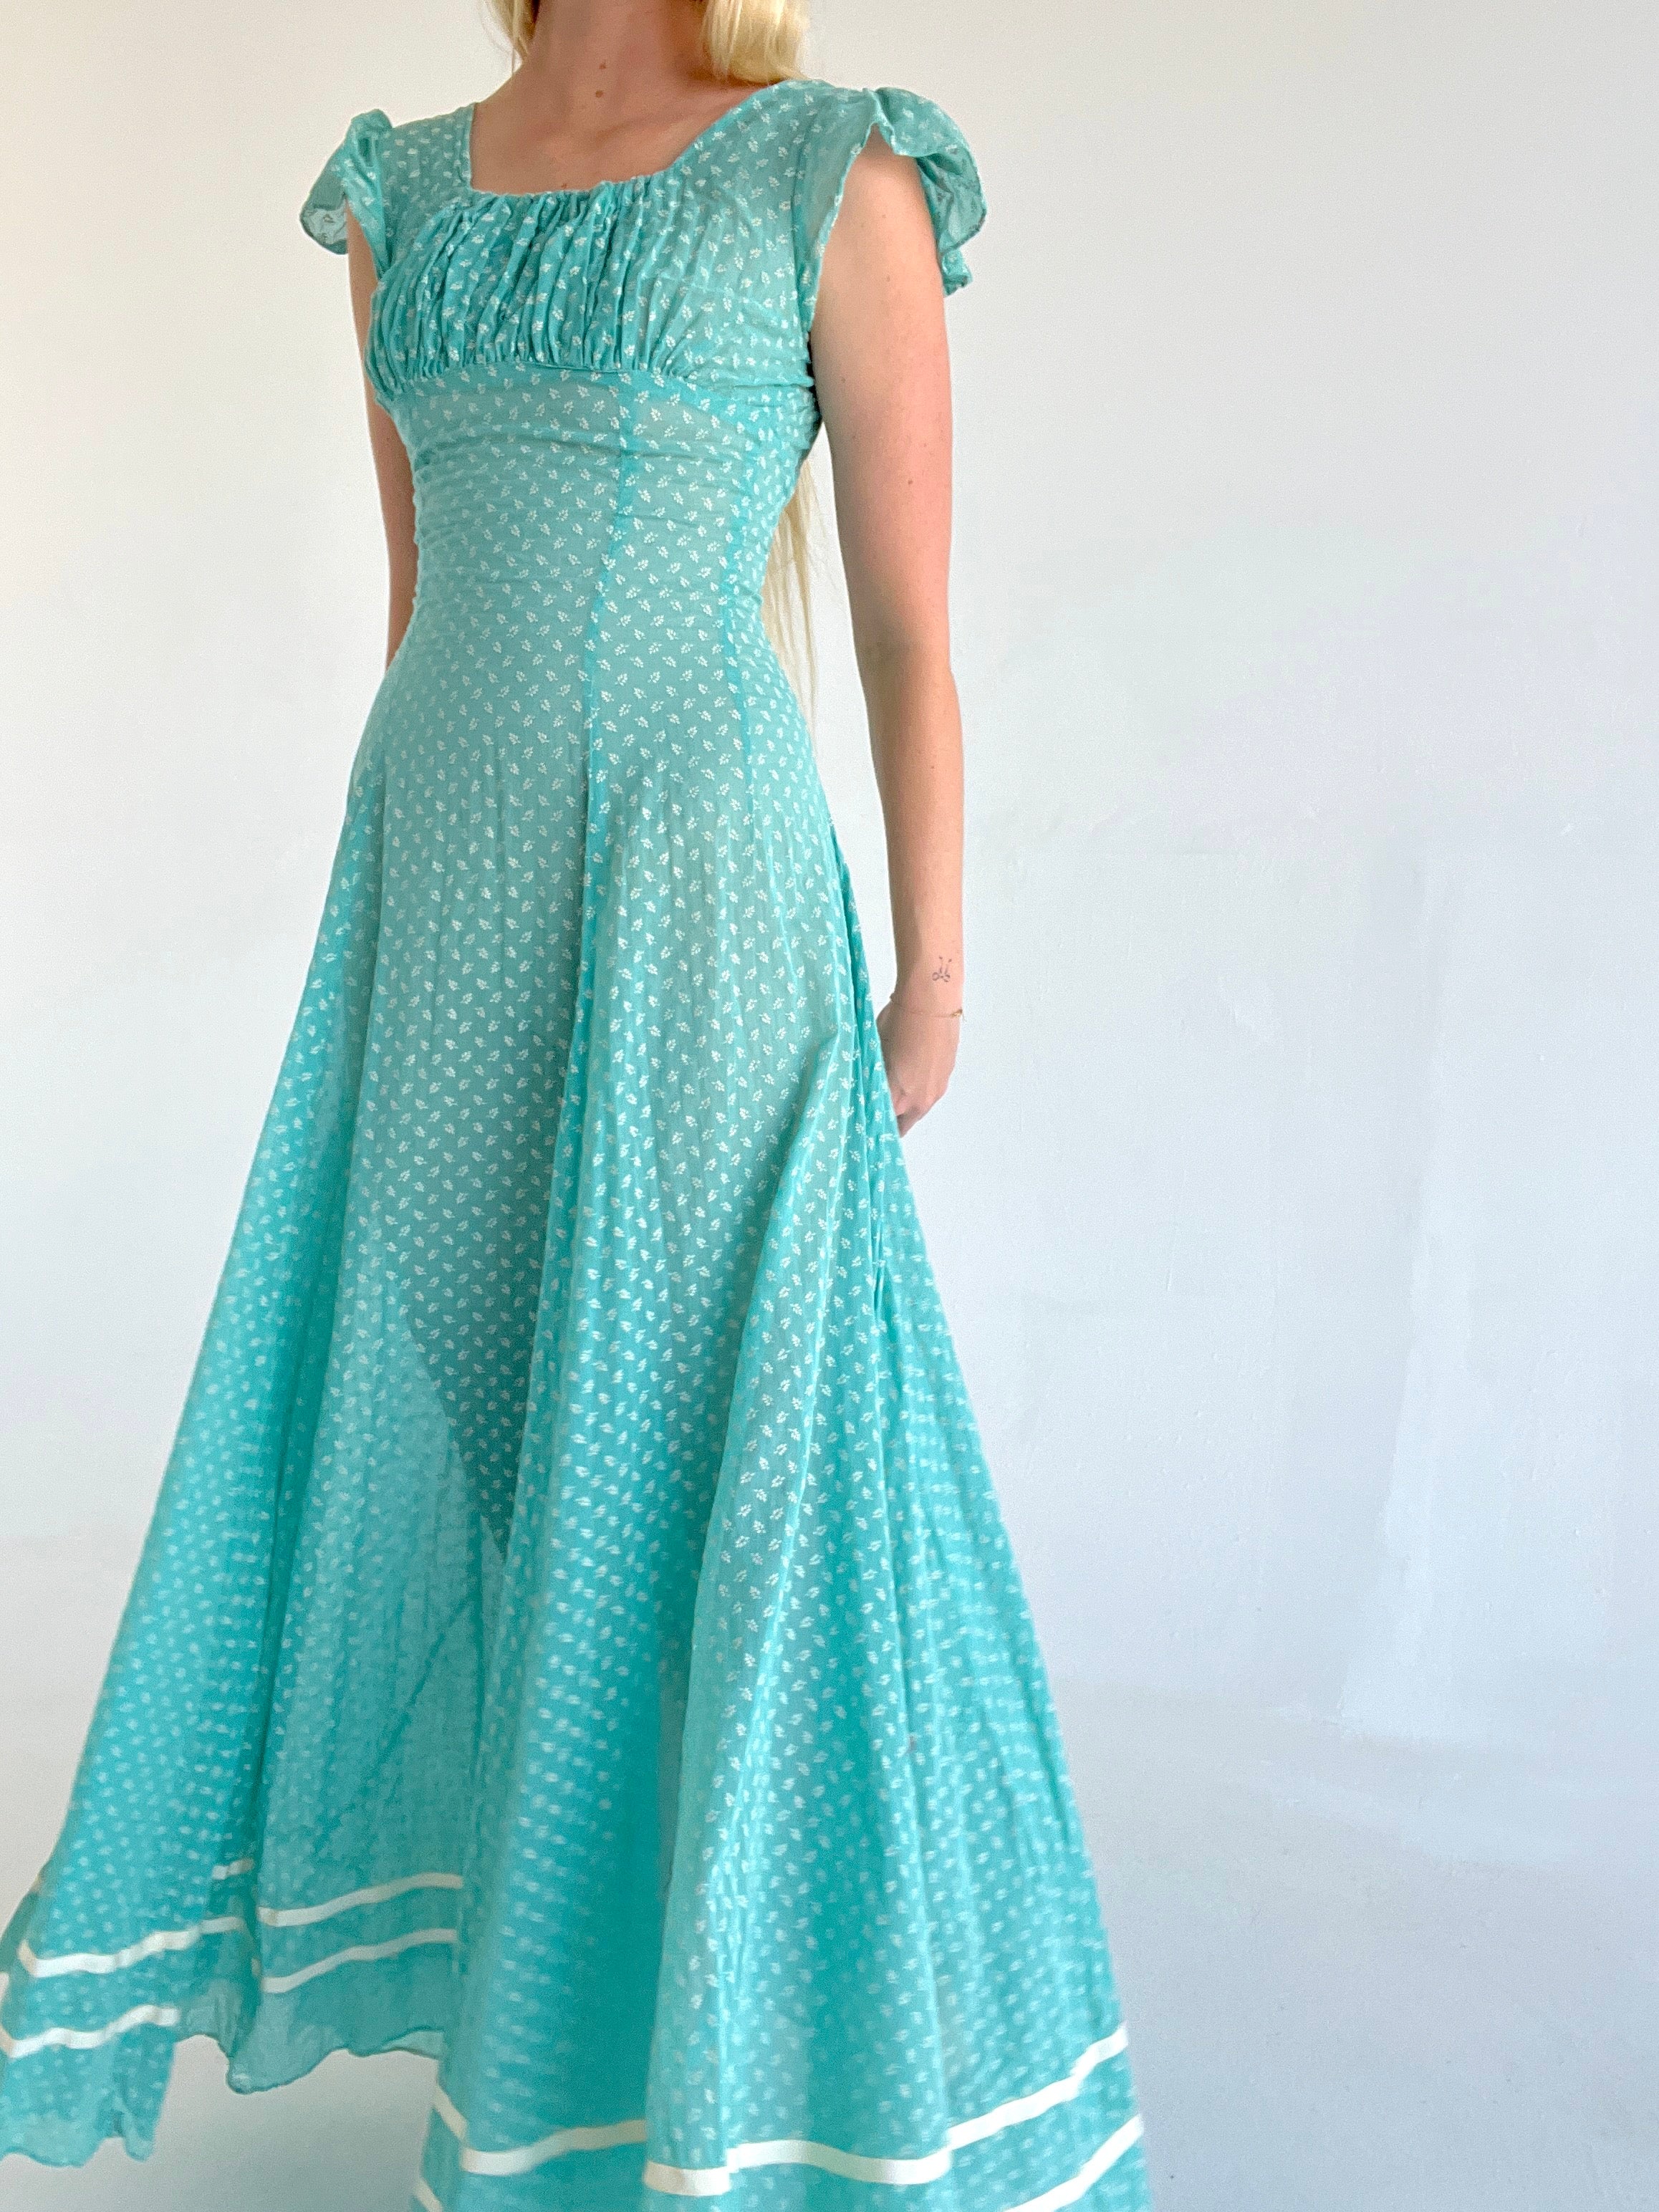 1930's Turquoise Gown With White Floral Print